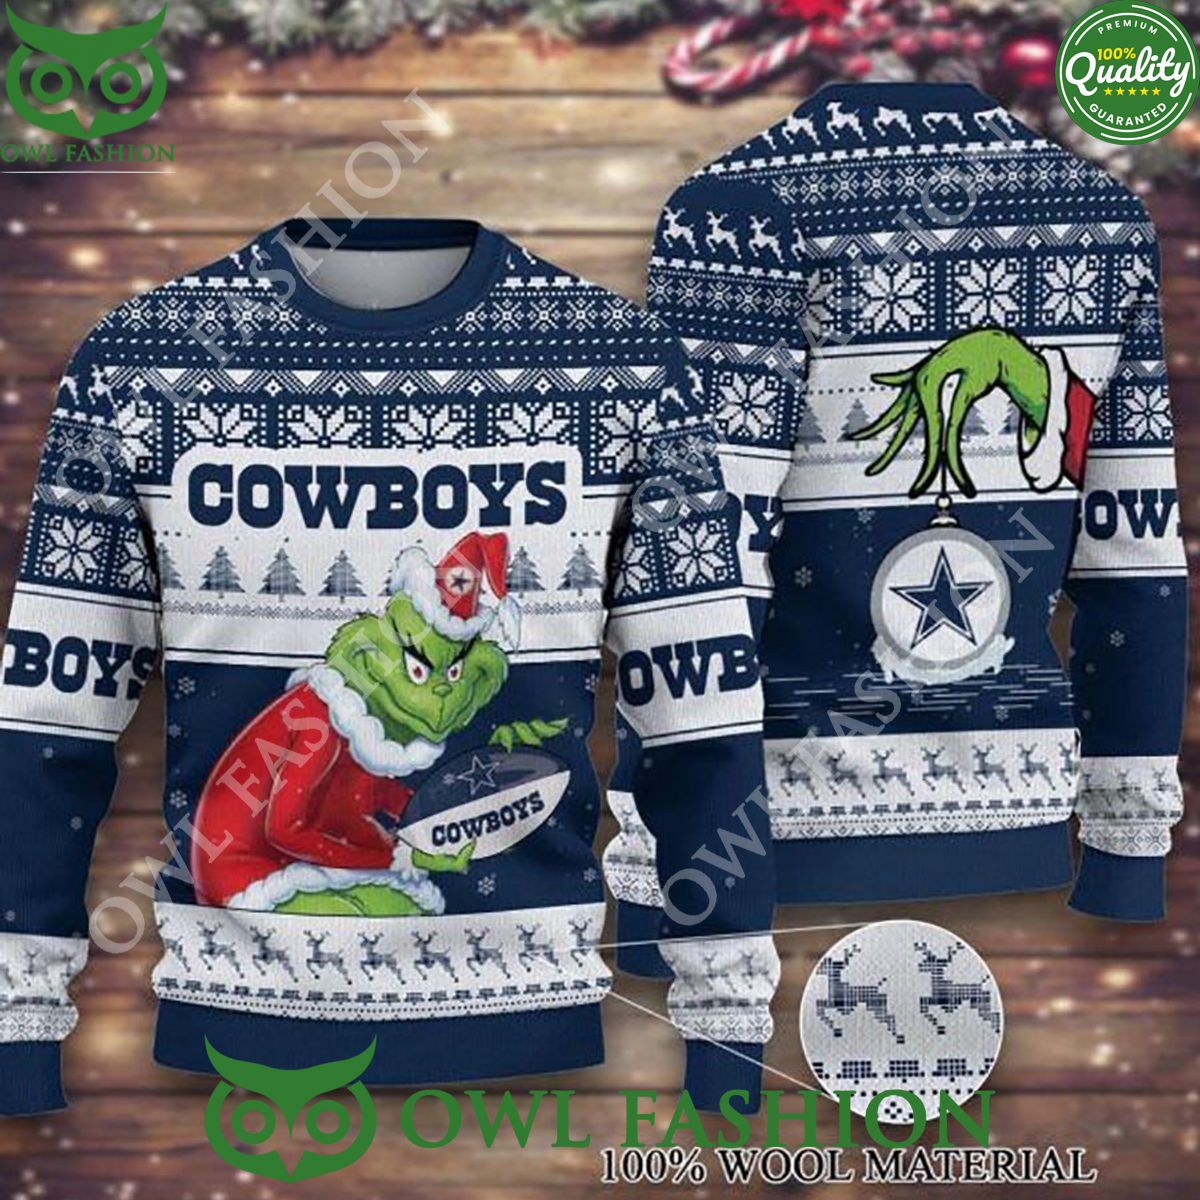 grinch stole christmas dallas cowboys ugly christmas sweater jumper 1 vUE0J.jpg